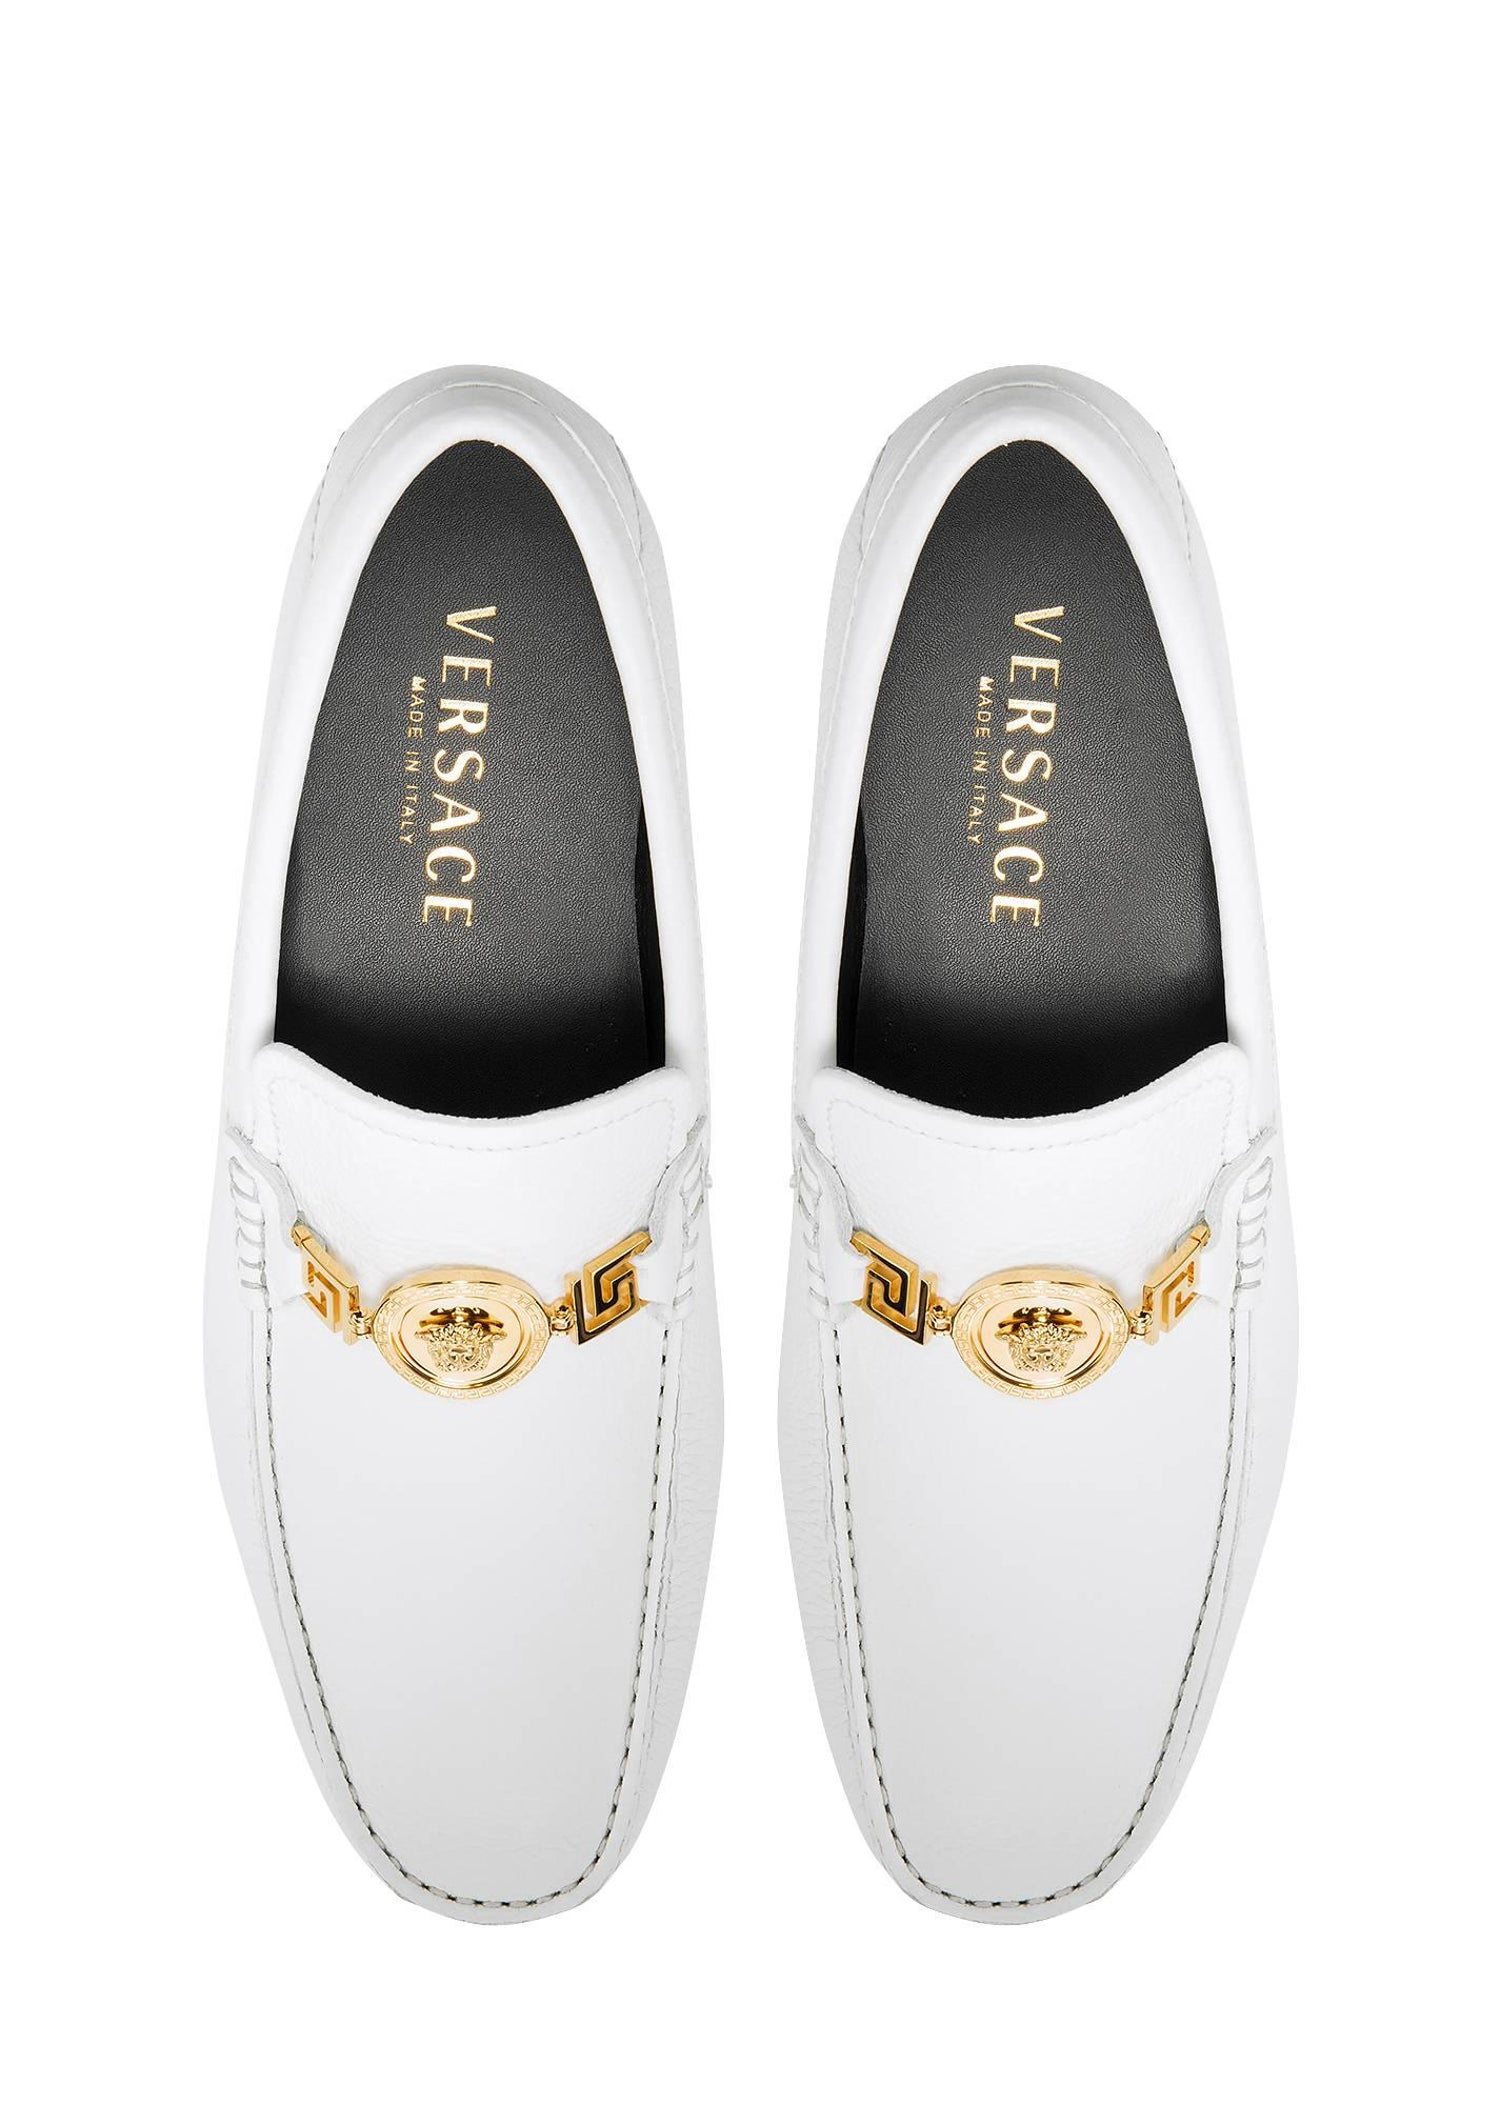 Versace White Deer Skin Signature Loafers Shoes **as seen in movie at  1stDibs | white versace loafers, versace shoes loafers white, versace white  loafers